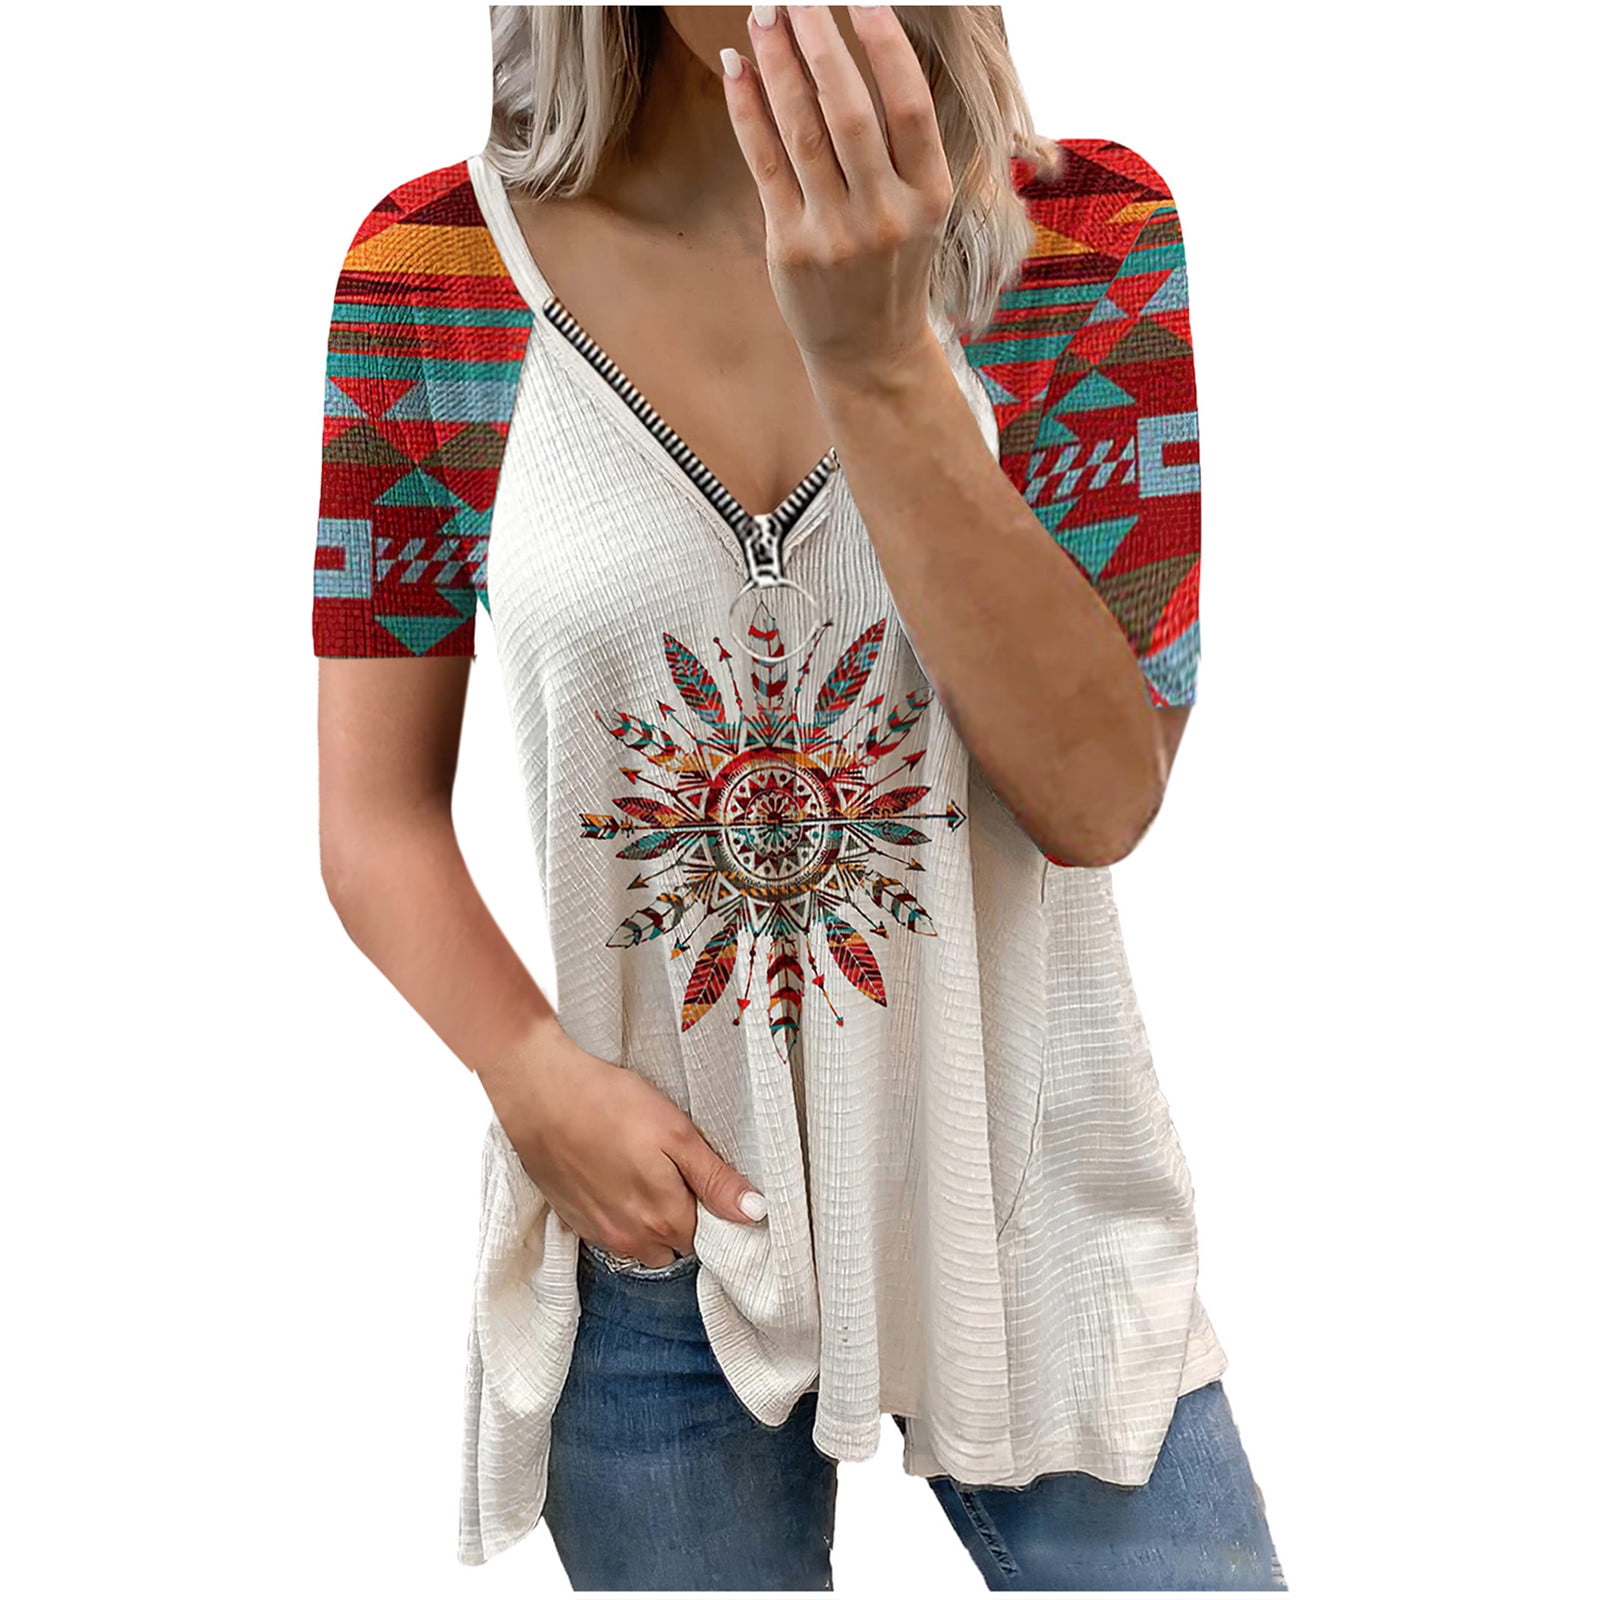 Western Aztec Shirts for Women Zipper Front V Neck Retro Tshirts Casual ...